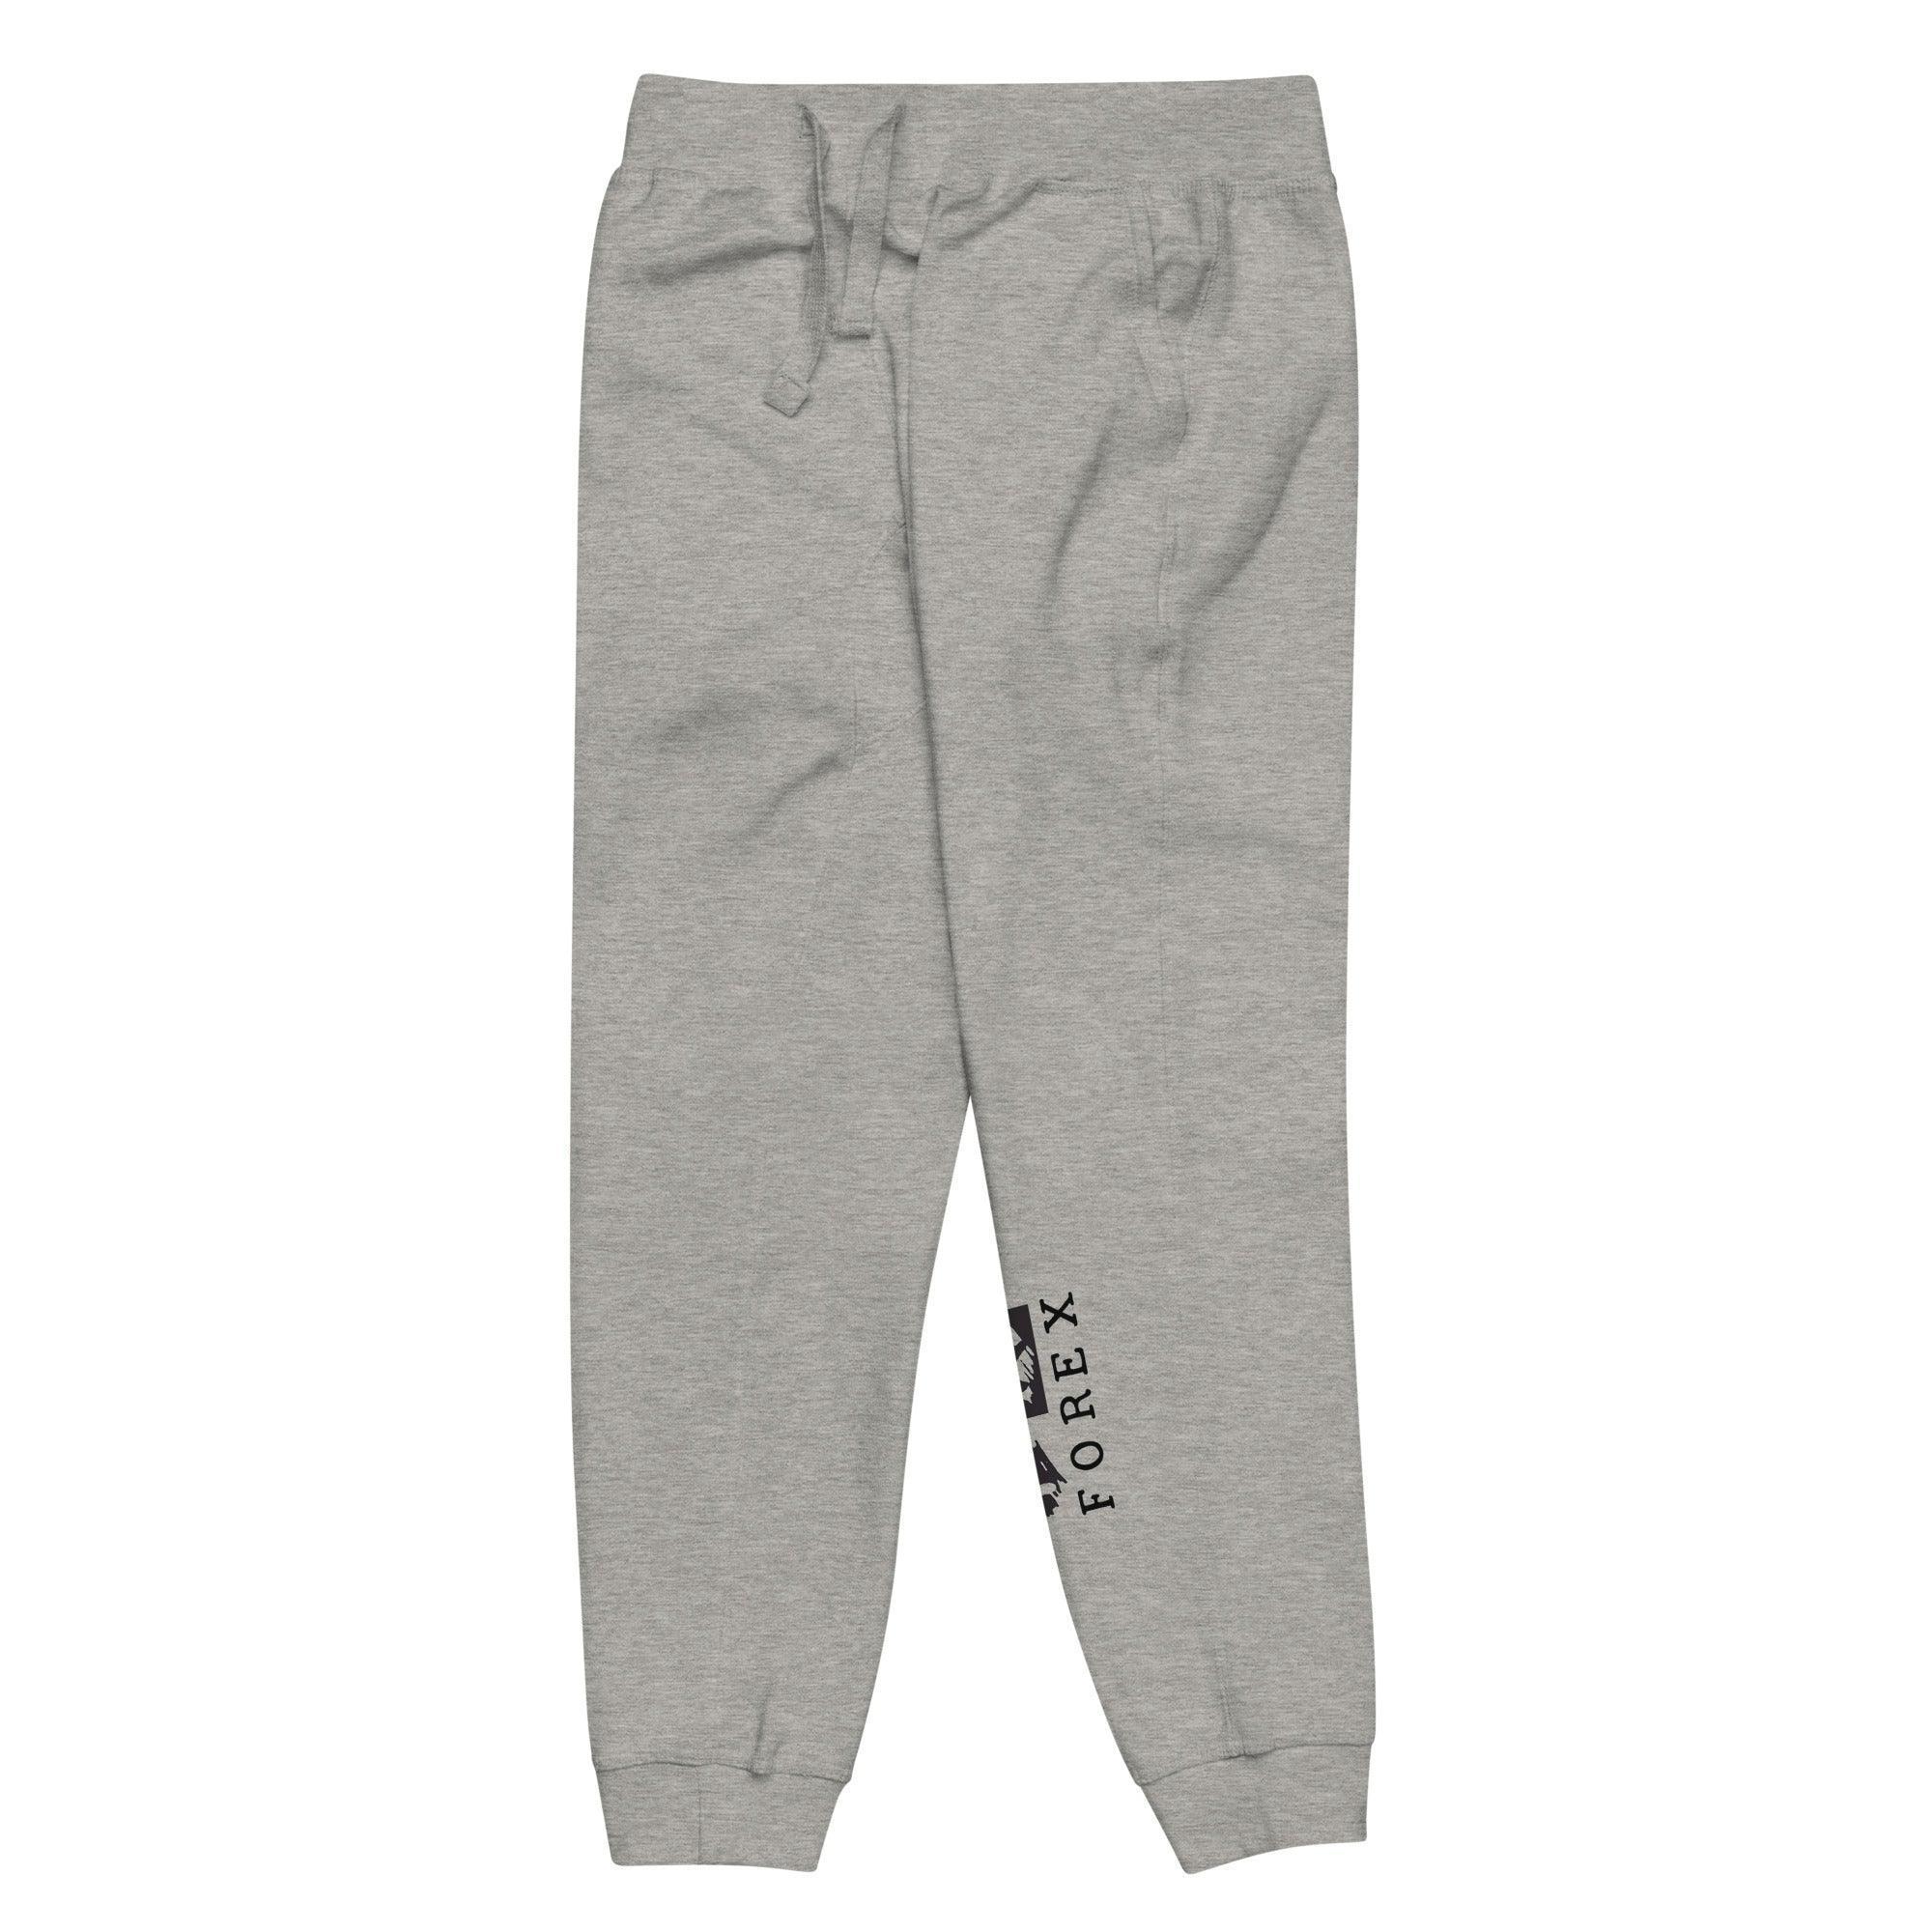 FX | Forex Sweatpants - InvestmenTees